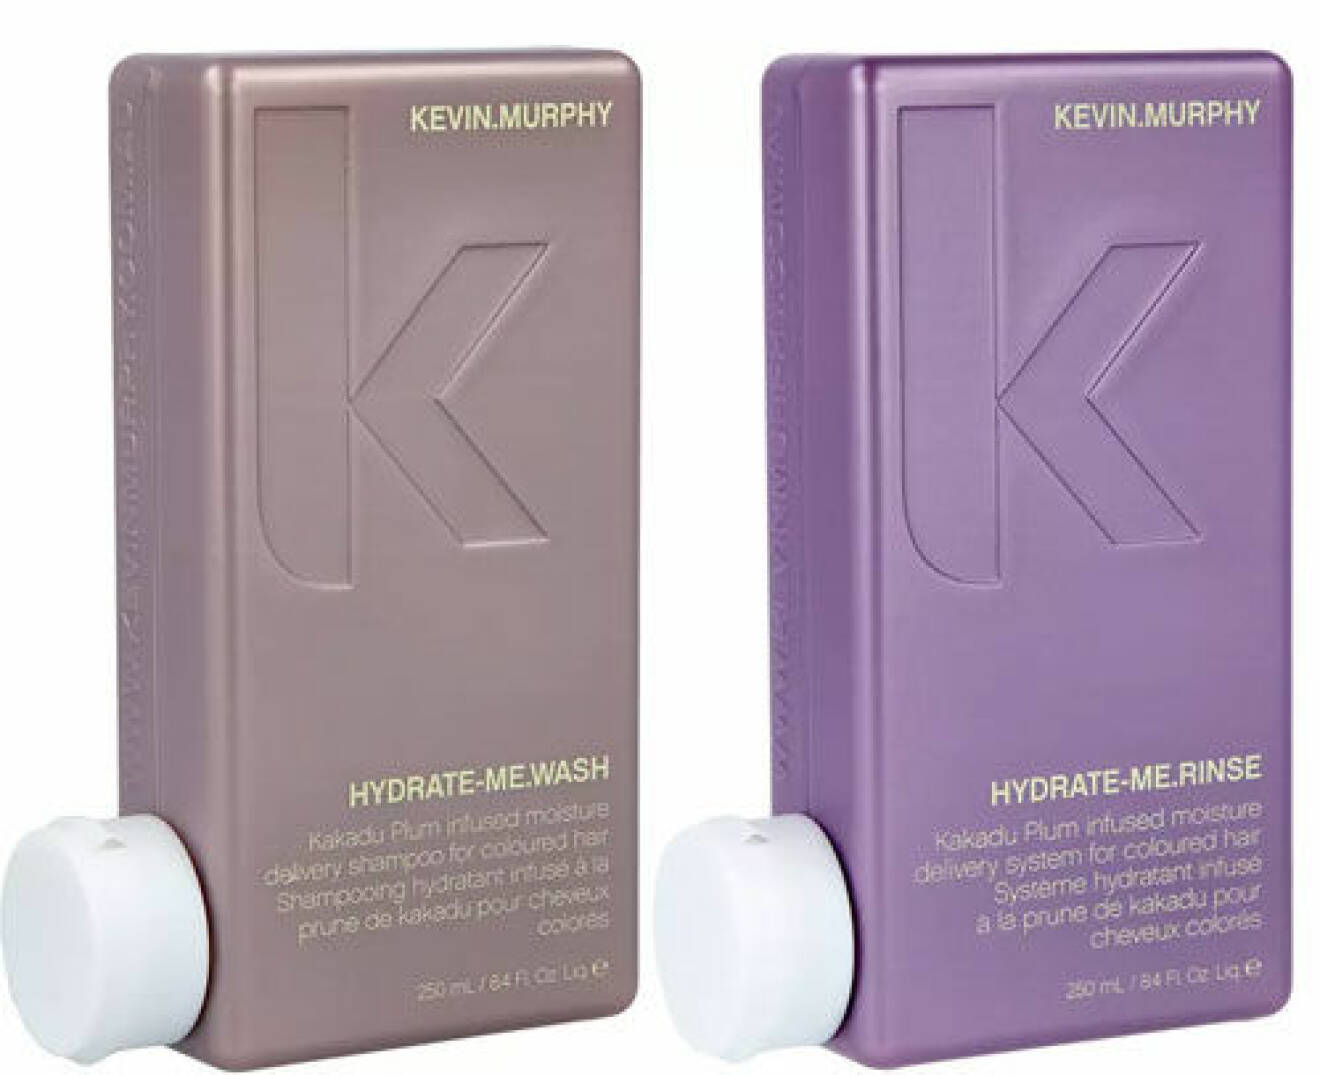 Kevin Murphy Hydrate me